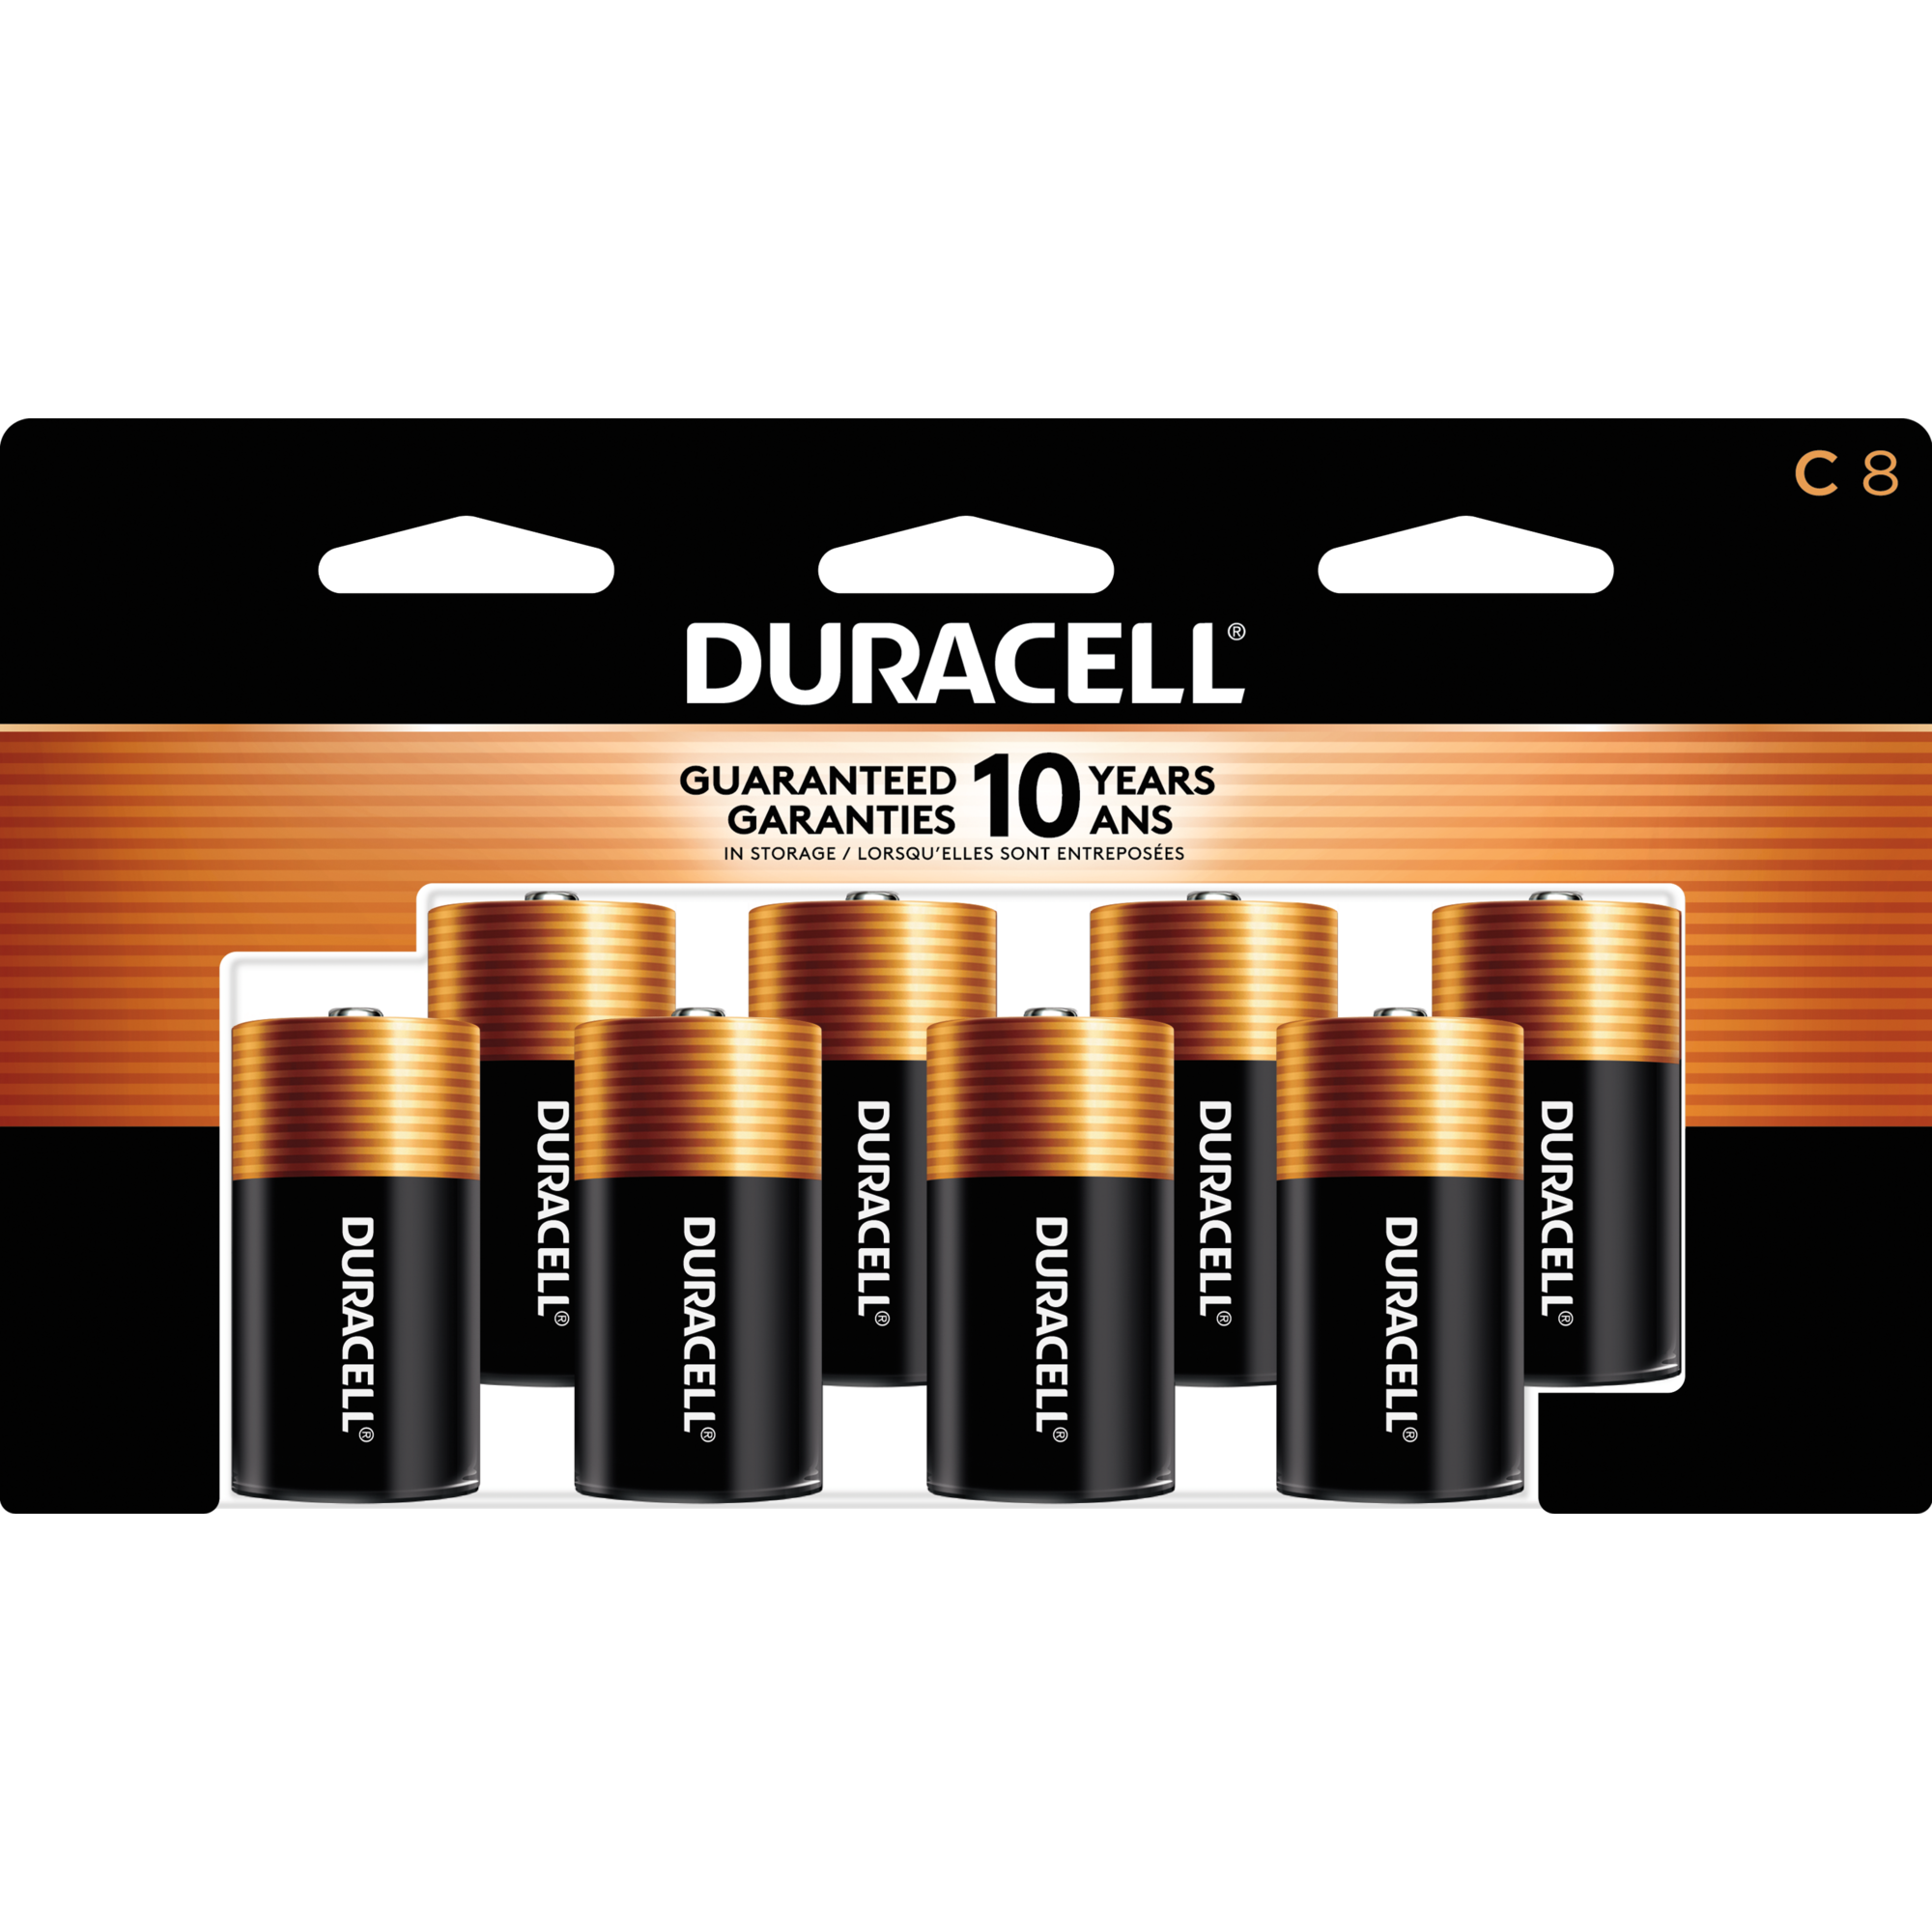 Duracell Coppertop Alkaline C Batteries (8-Pack) in the C